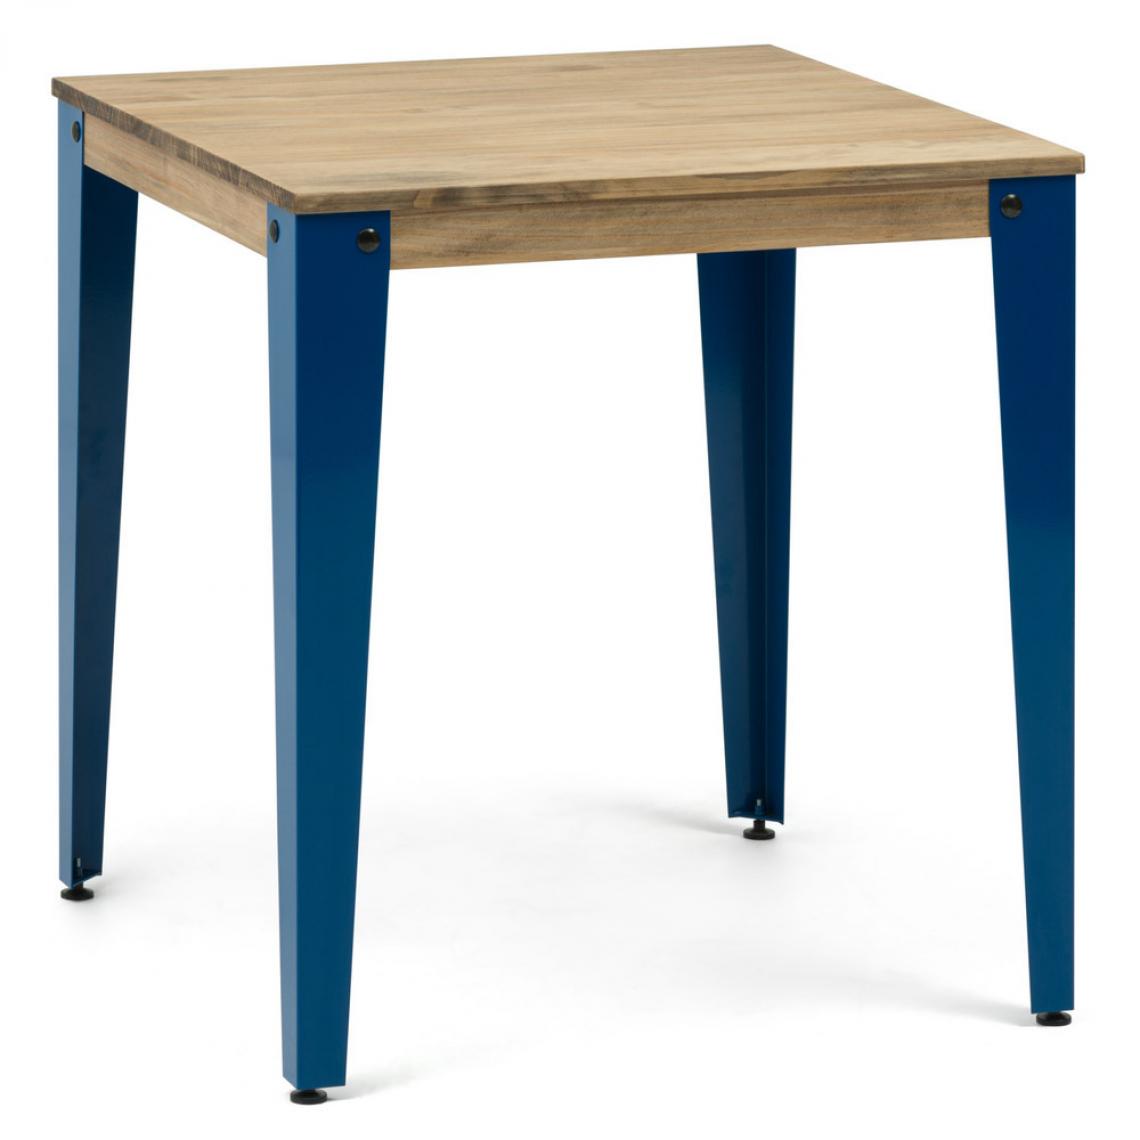 BOX FURNITURE - Table Salle à Manger Lunds 70x70x75cm Bleu-Vieilli Box Furniture - Tables à manger